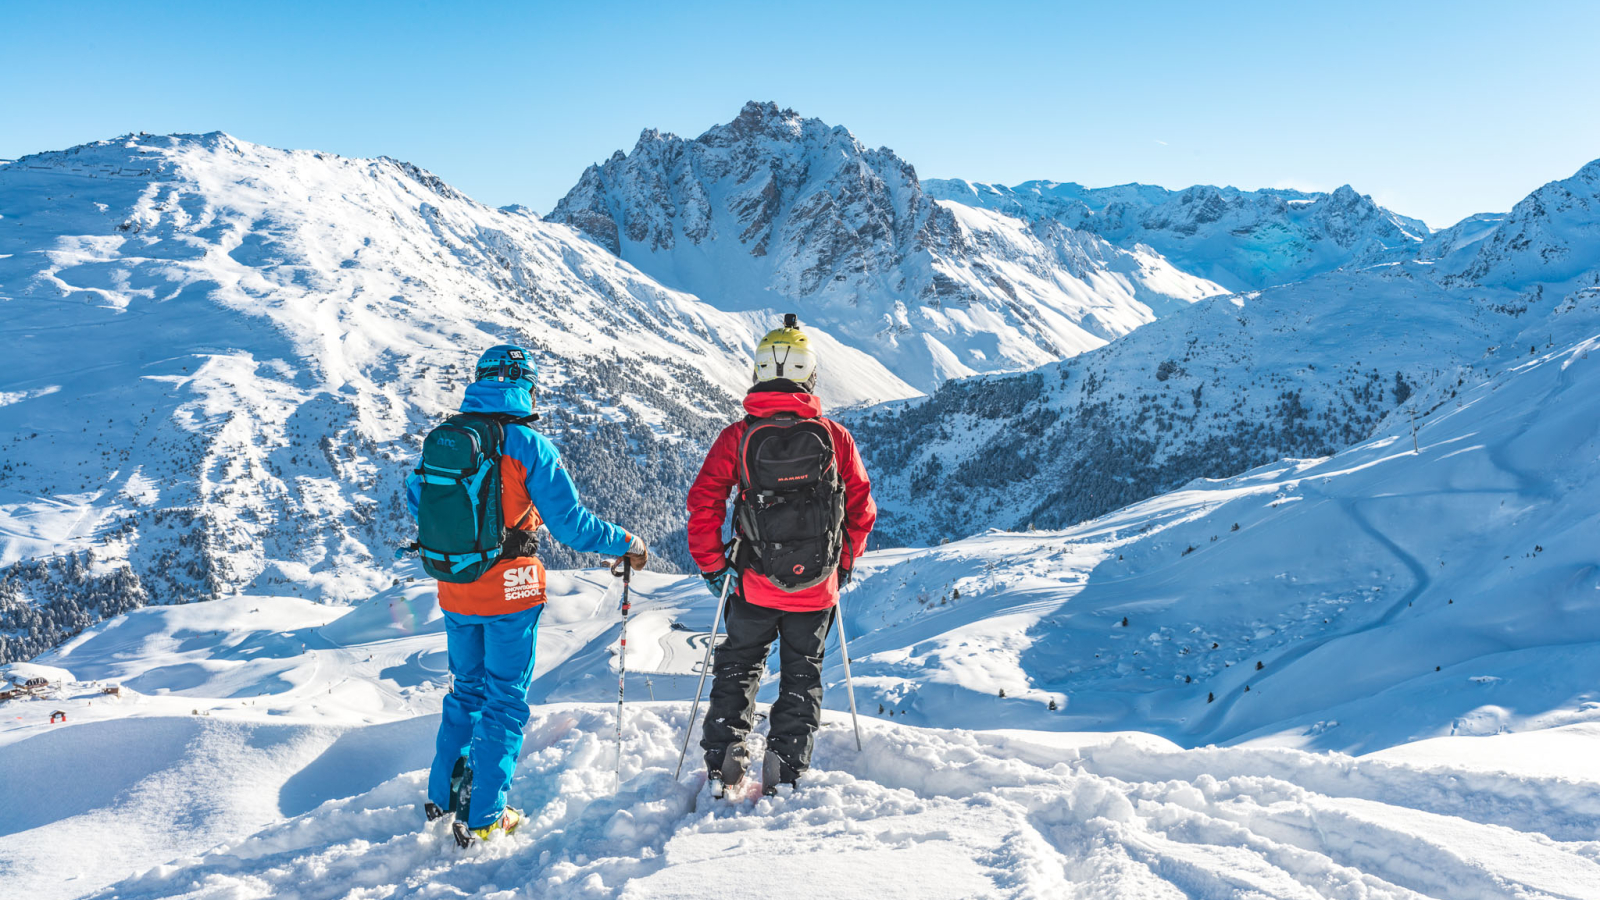 Feed your adventurous side and take a bite out of our off-piste & guiding lessons.